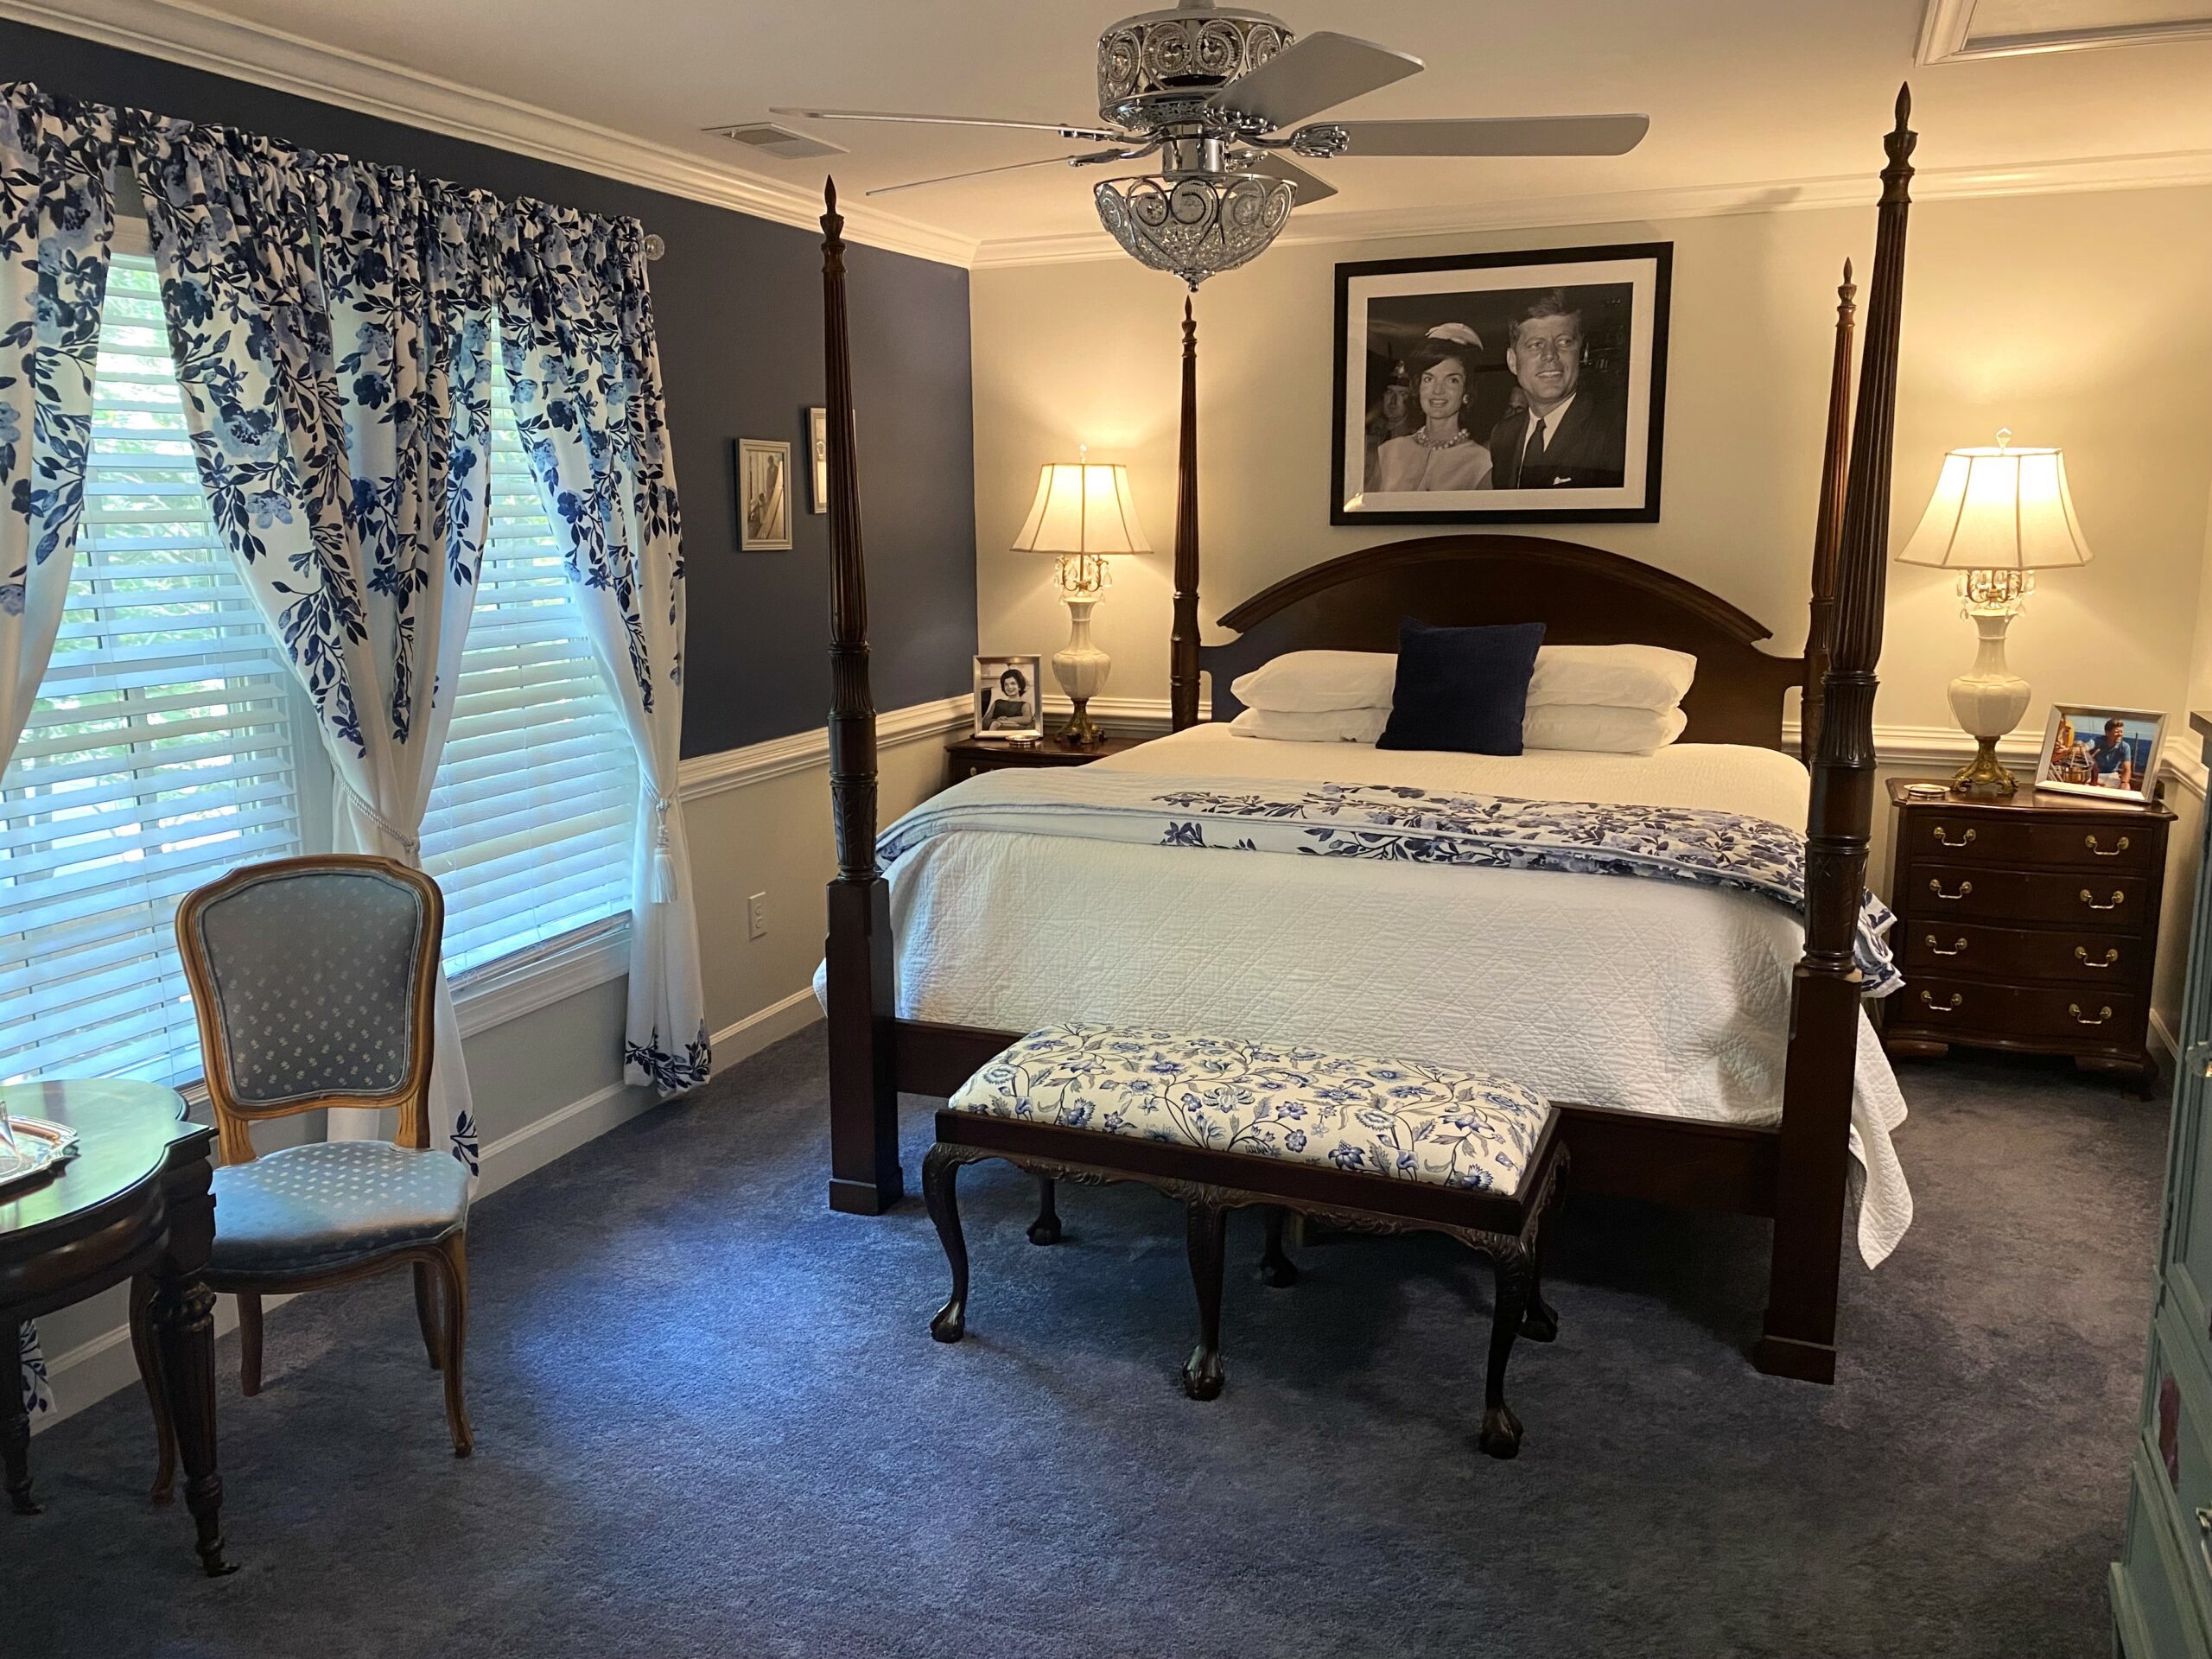 Kennedy Bedroom with 4 poster King bed